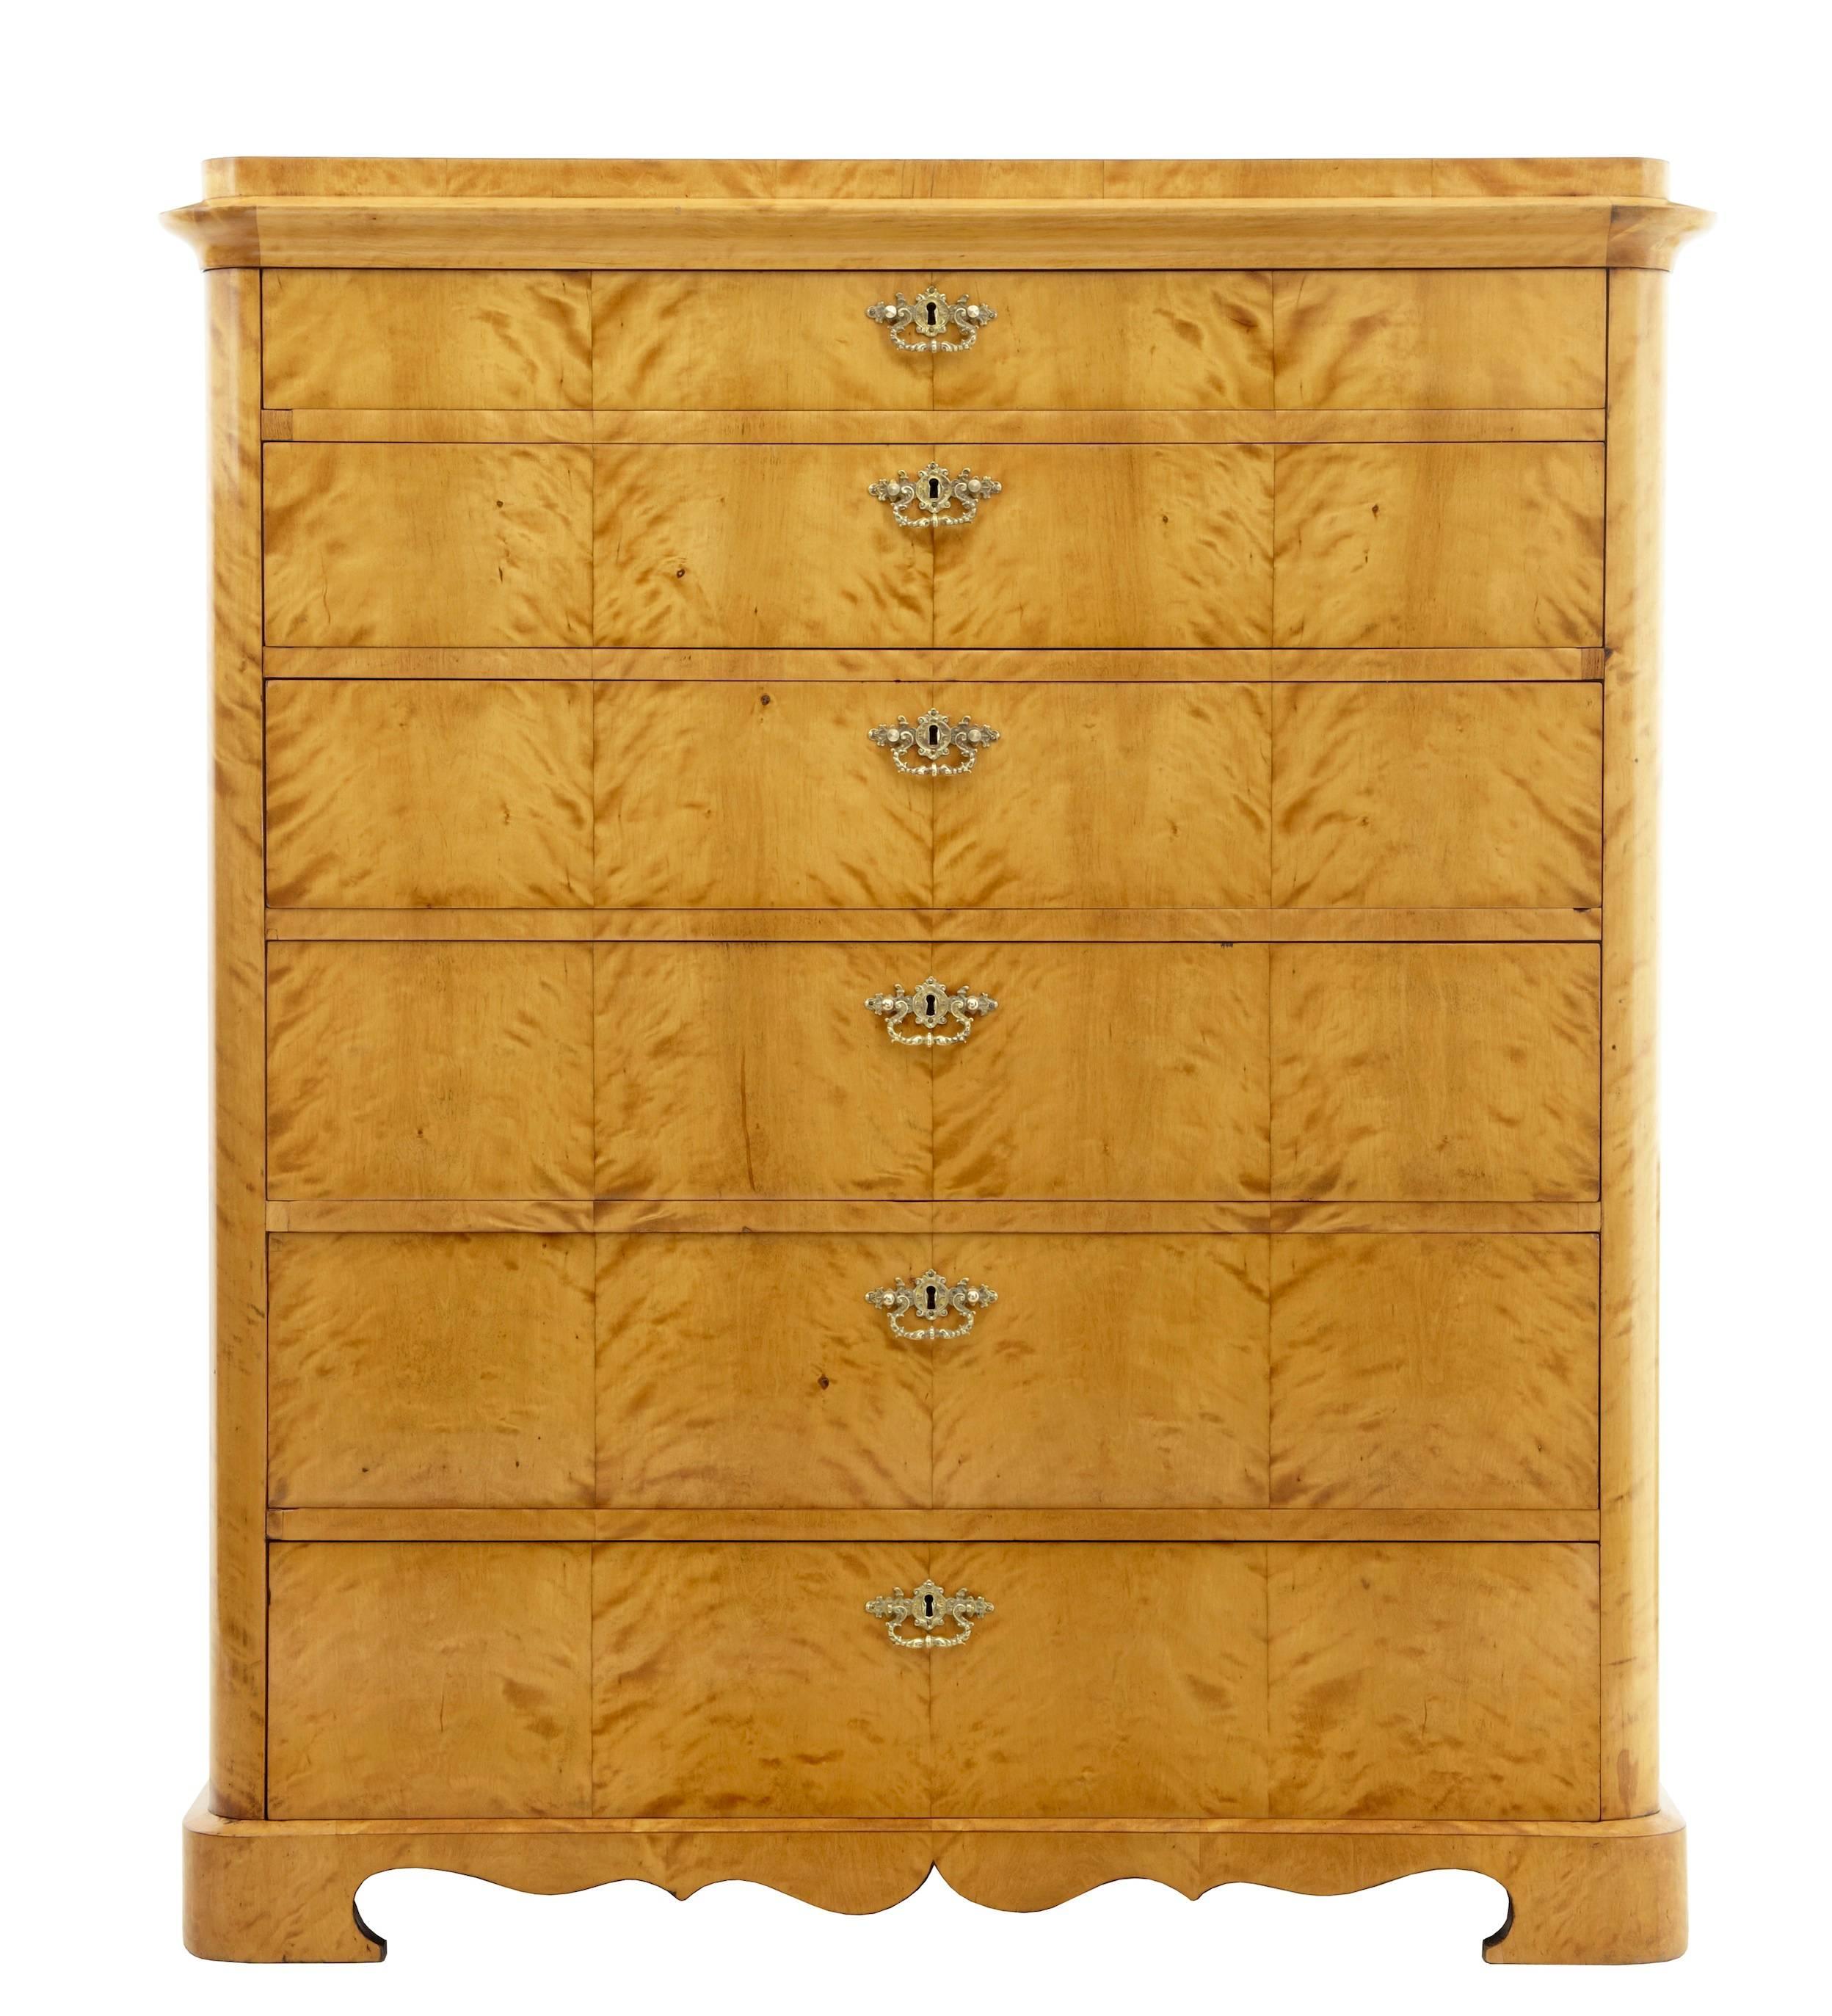 Beautiful birch chest of drawers, circa 1860.
Six graduating drawers still fitted with original ornate handles.
Good color and patina.
Standing on bracket feet.

Minor restoration to veneers.
  
Measures: Height 54